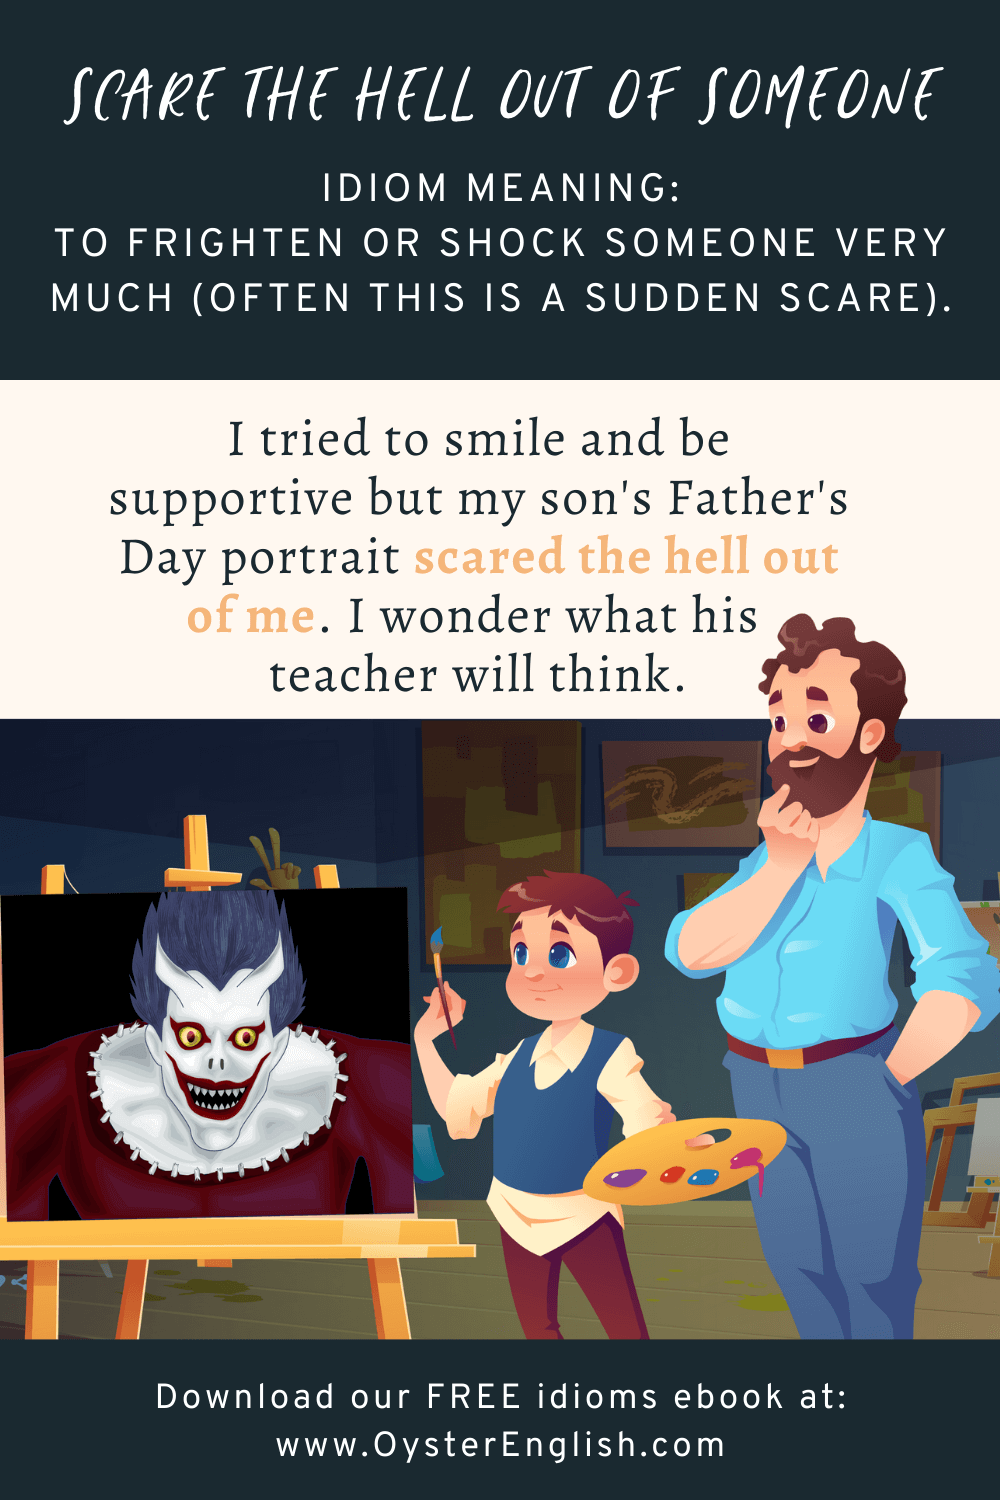 A boy stands at an easel holding the painting of an evil demon. A puzzled father looks on: I tried to smile and be supportive but my son's Father's Day portrait scared the hell out of me.